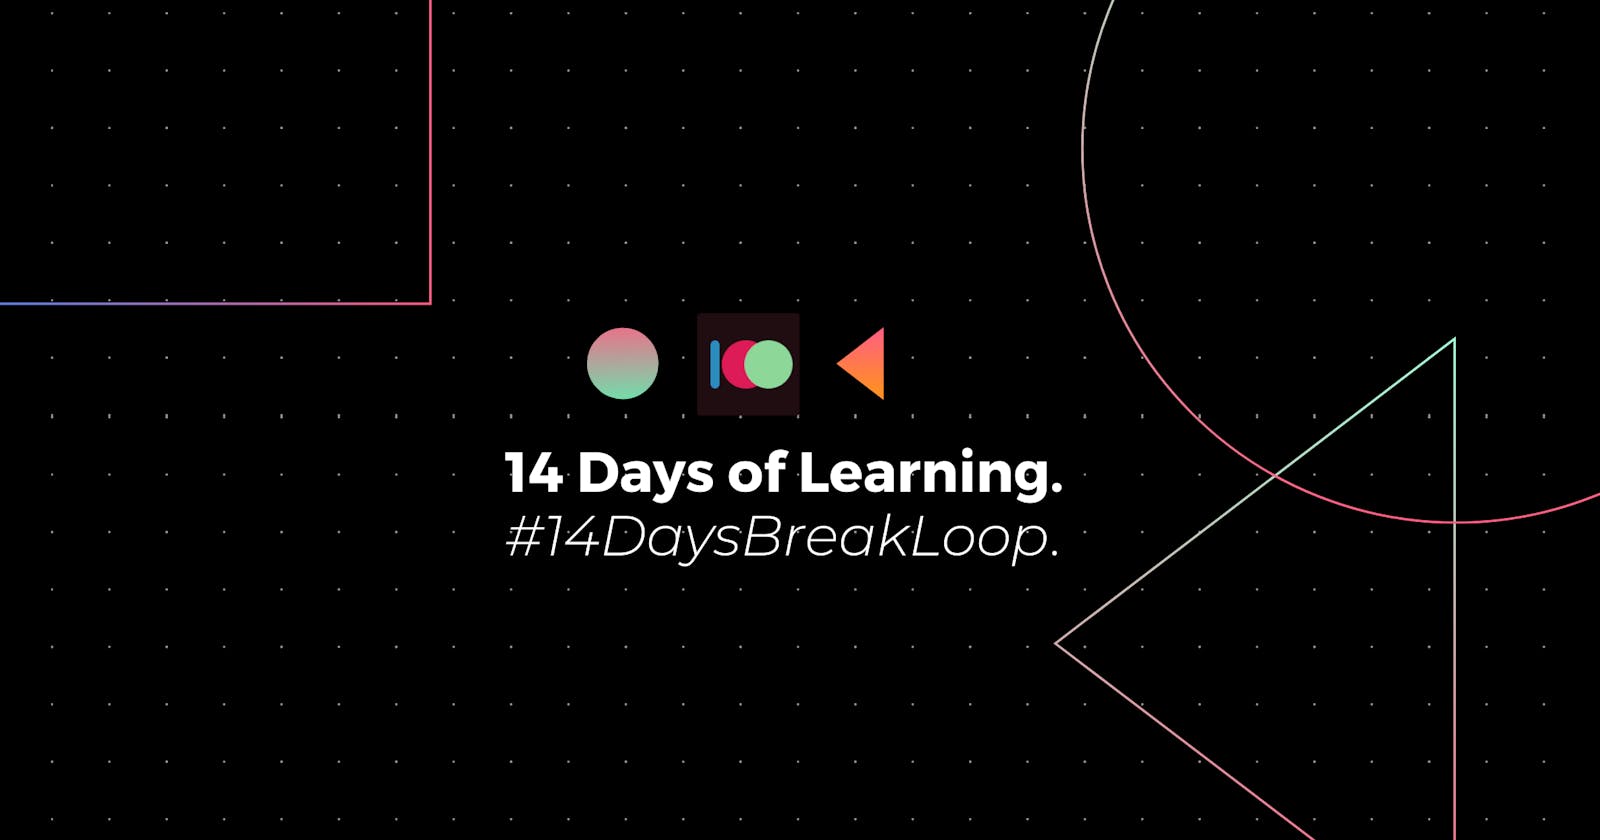 14 Days of Learning #14daysbreakloop challenge